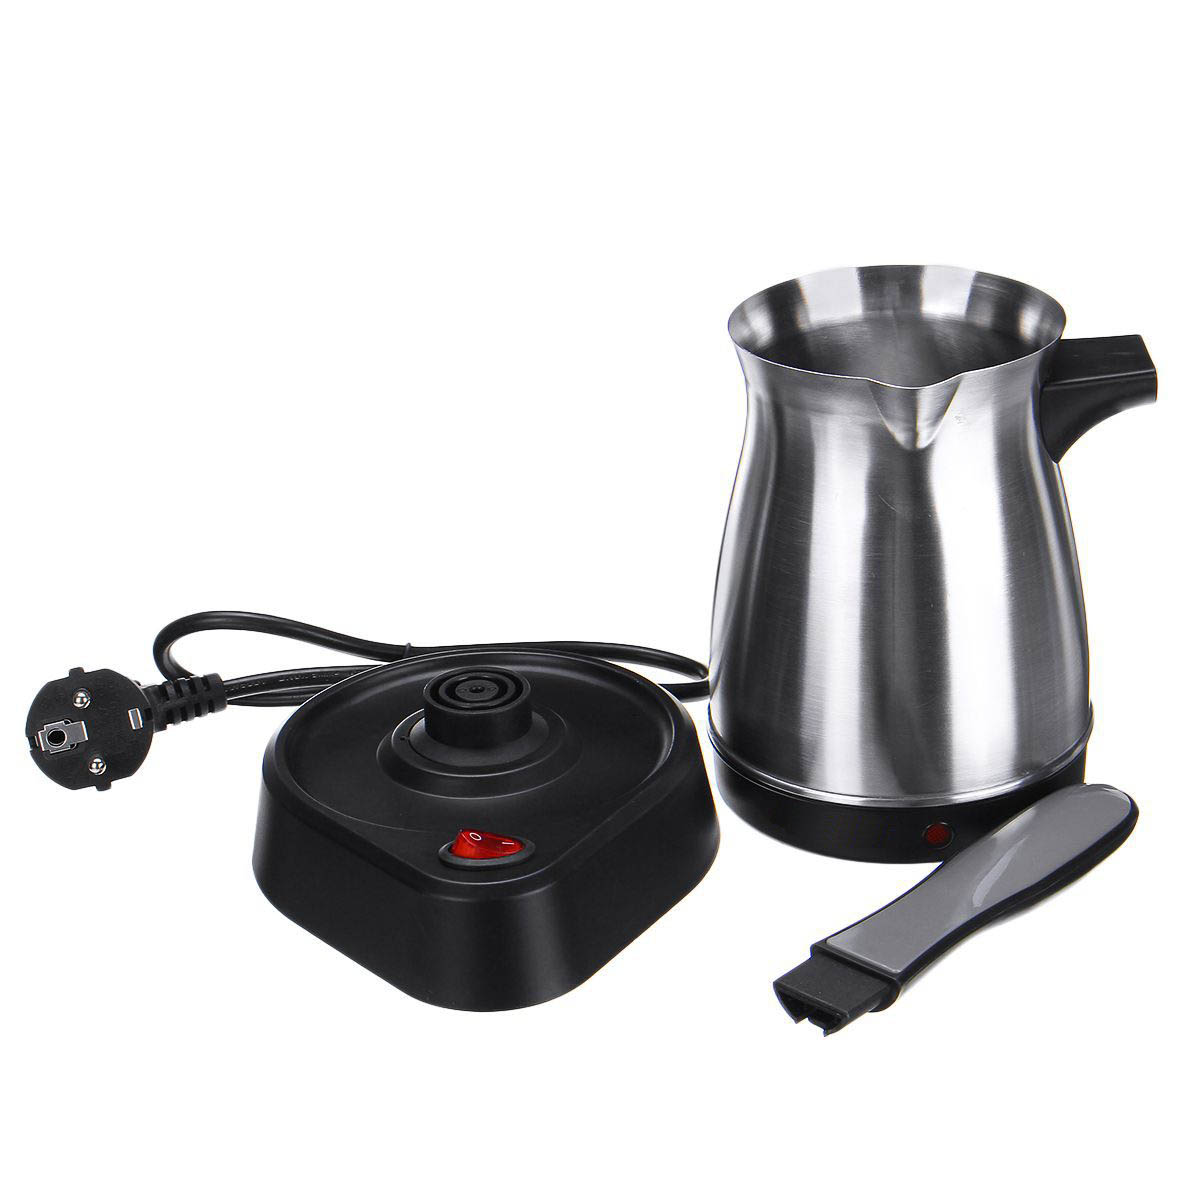 https://scoutstock.com/images/detailed/11/CF-05AS_Electric_coffee_maker__2_.jpg